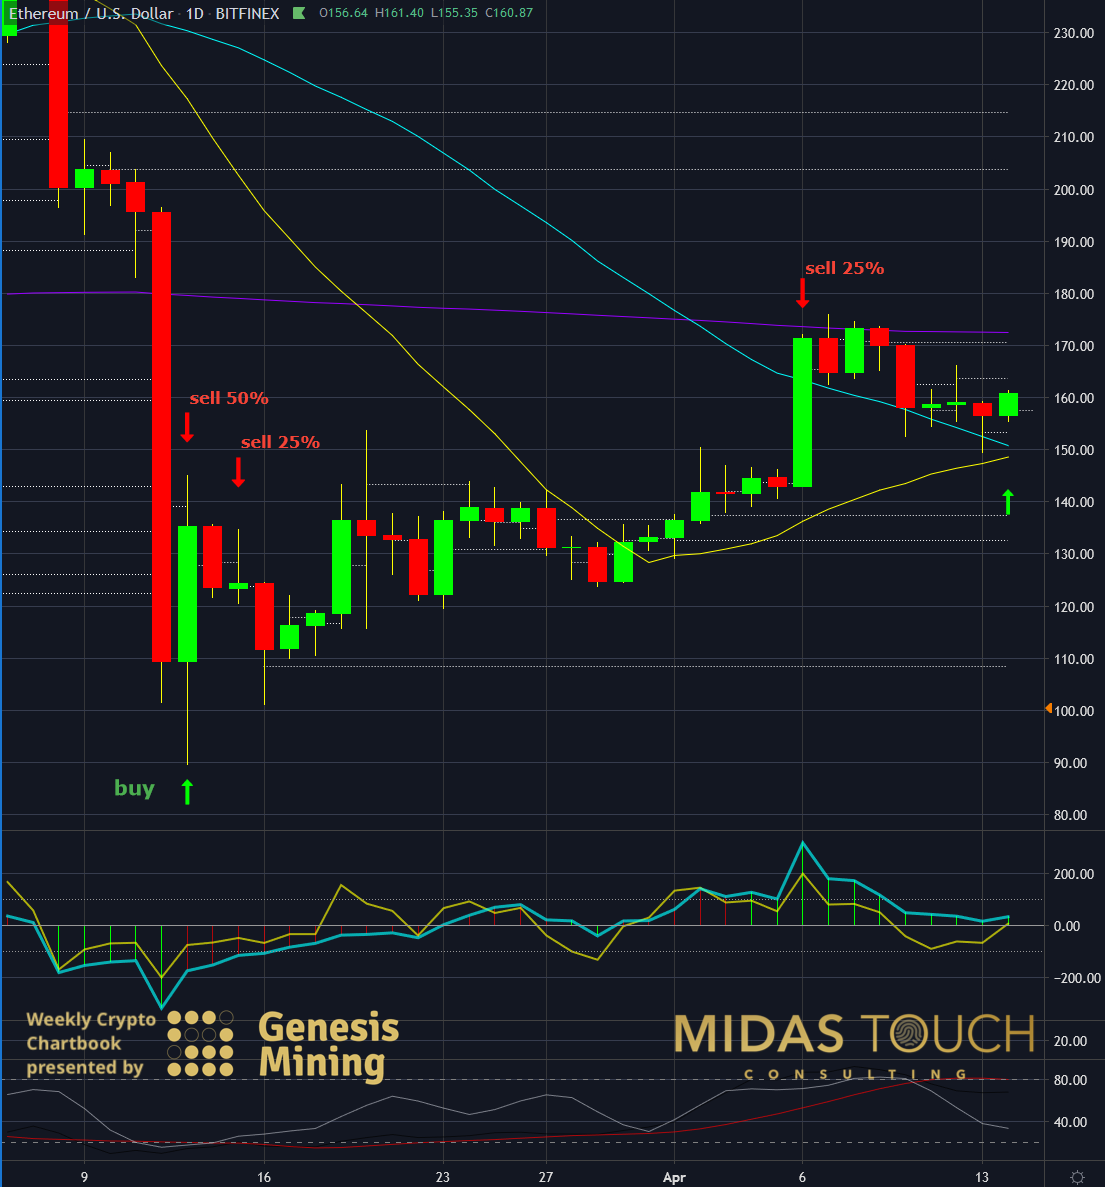 ETHUSD daily chart as of April 14th, 2020